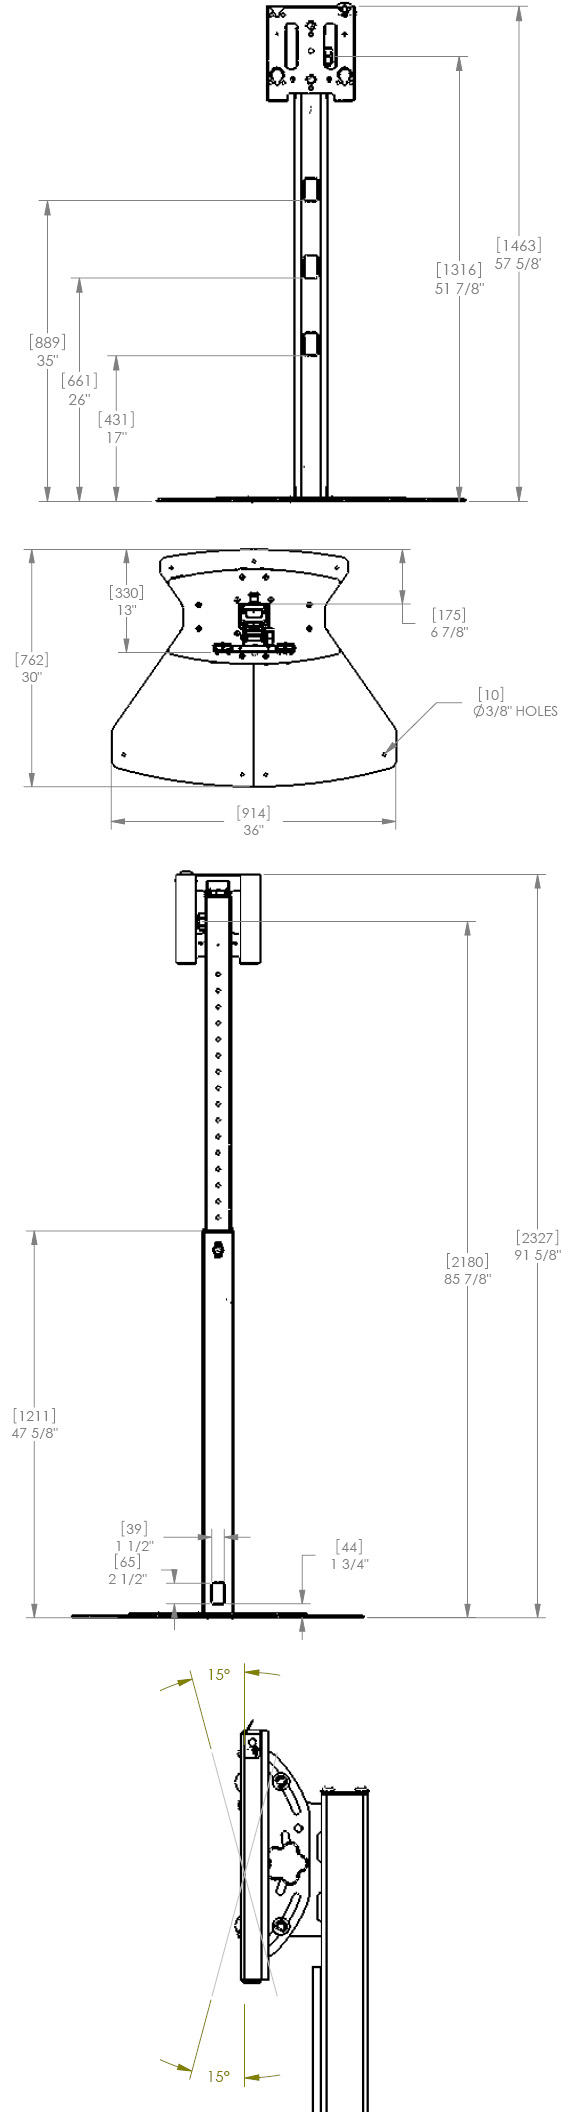 Technical Drawing for Chief MF16000 Display Floor Stand